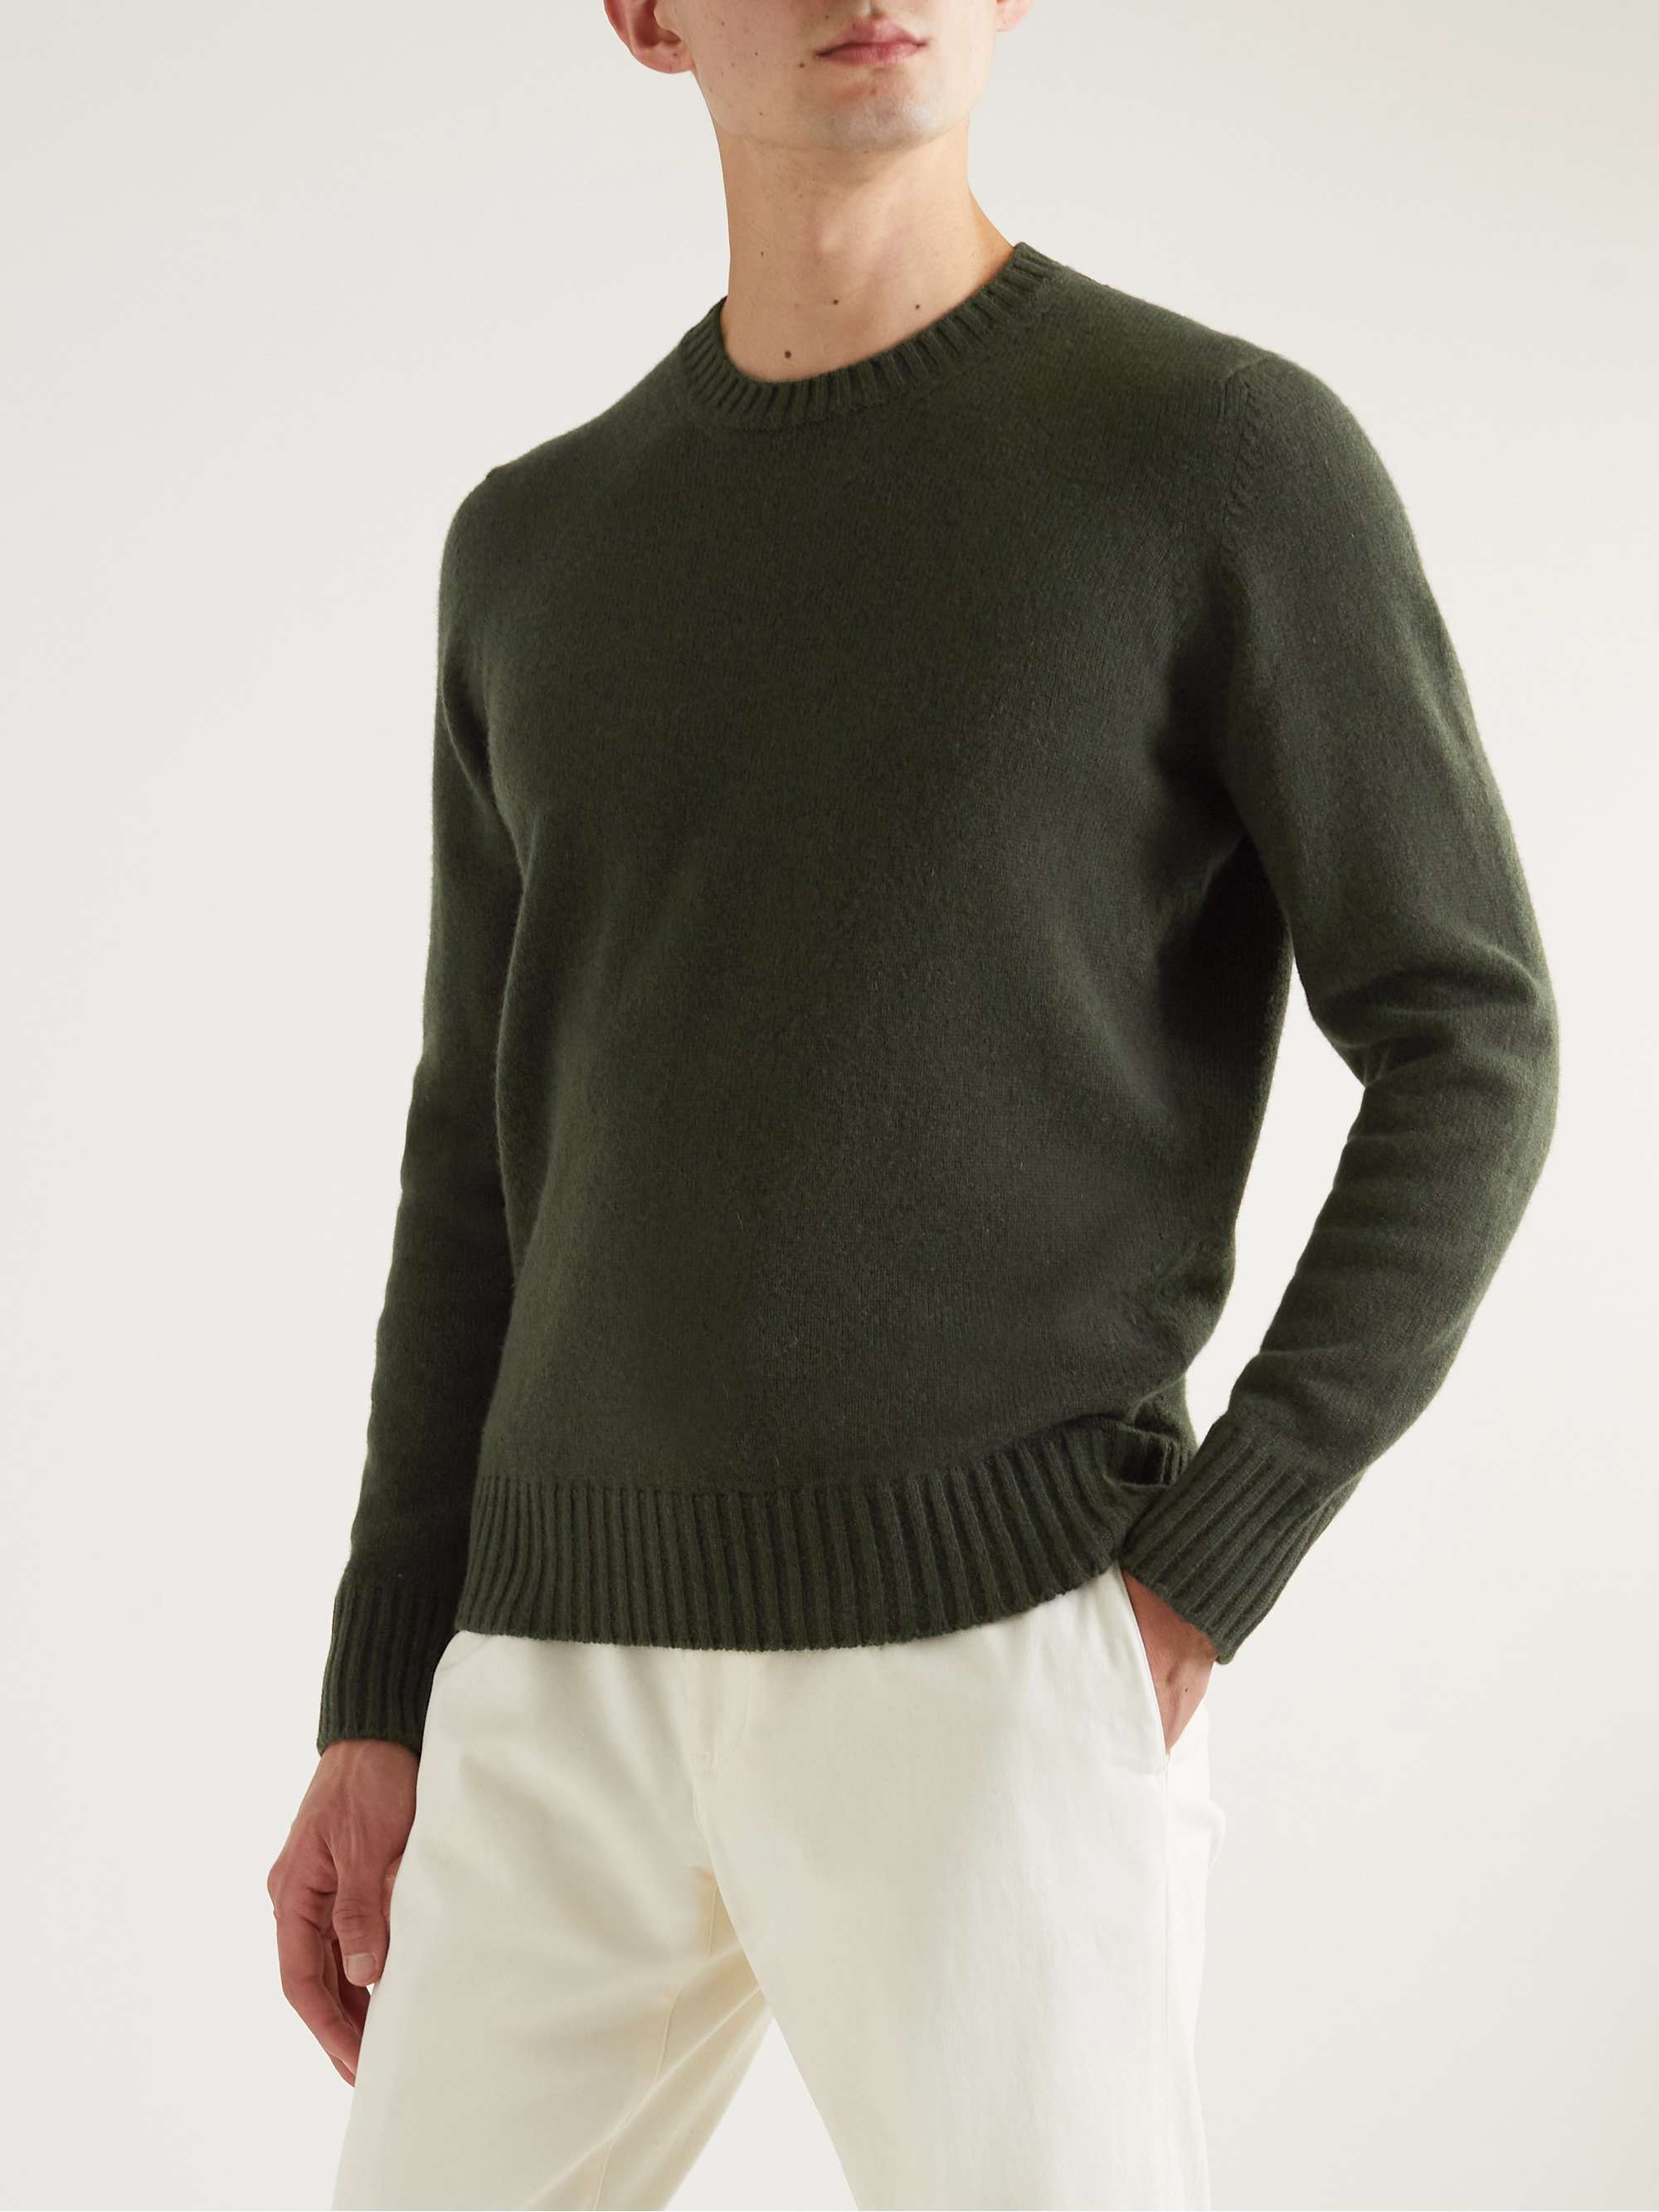 DE PETRILLO Slim-Fit Wool and Cashmere-Blend Sweater